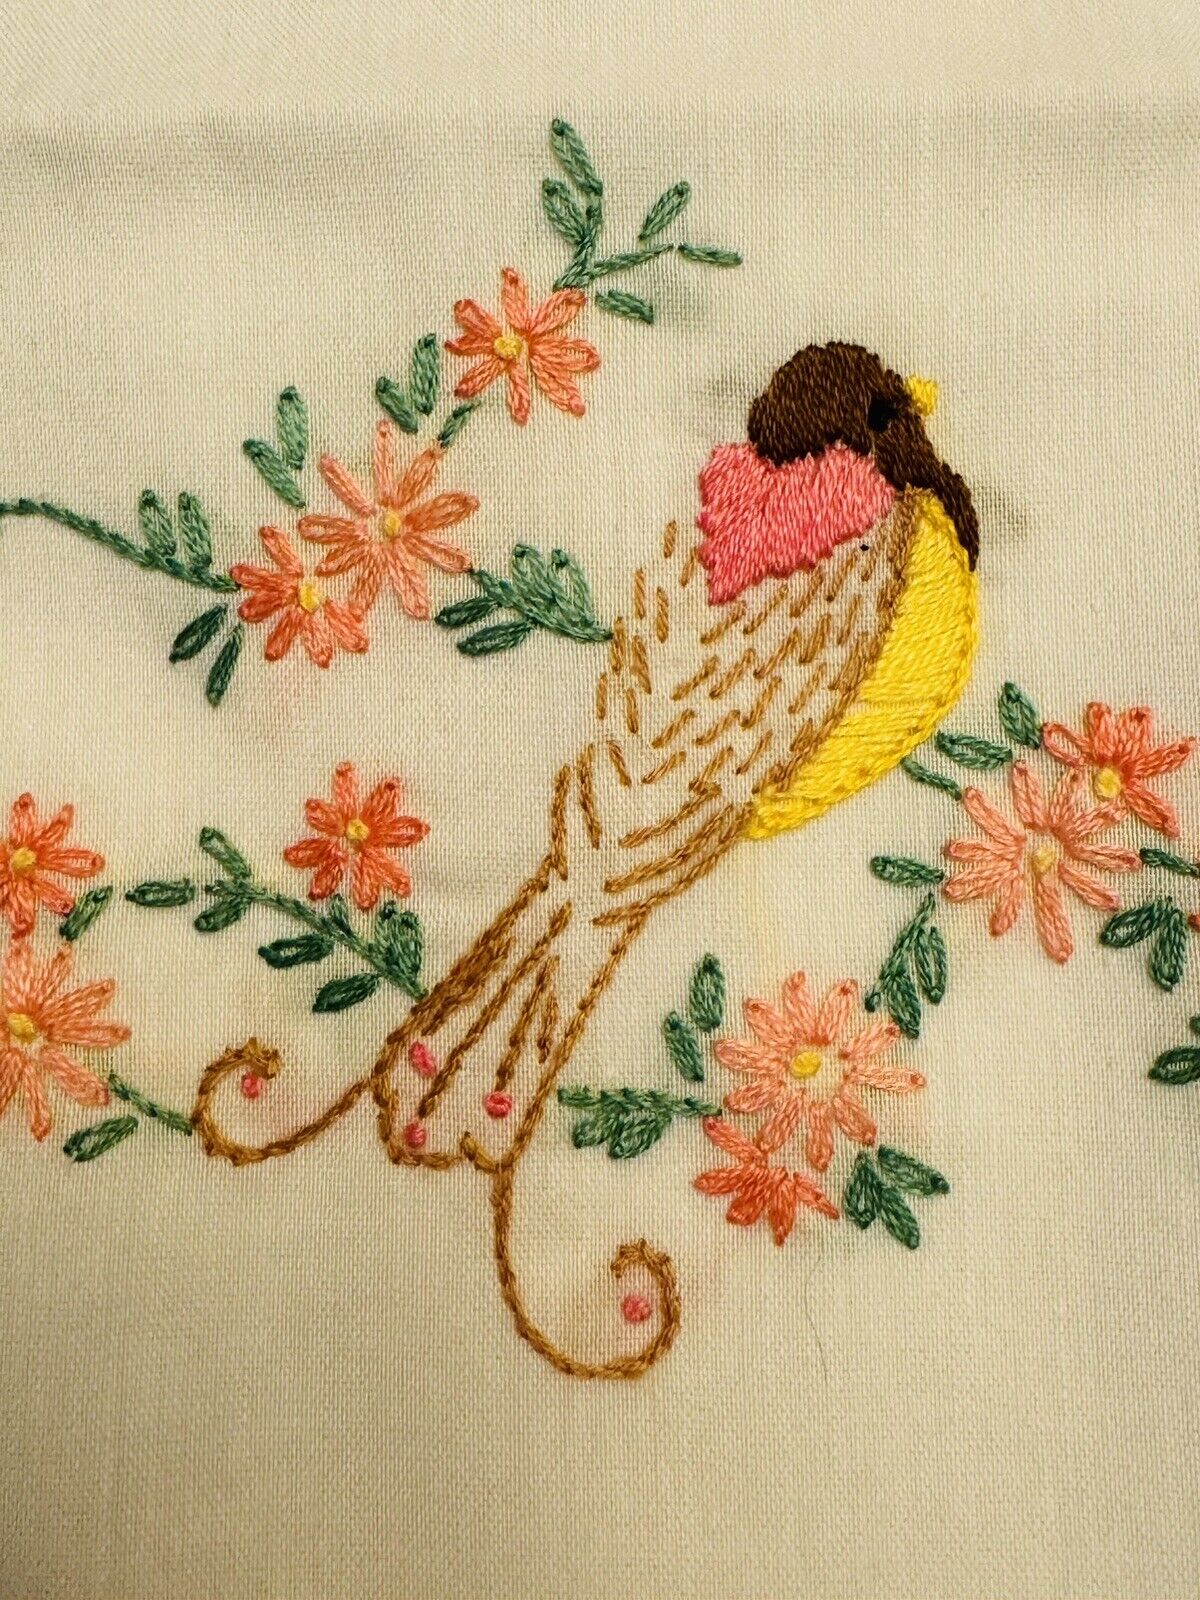 Vintage Handmade Song Bird Pillowcases Set of 2 Hand Embroidered  20 x 30”